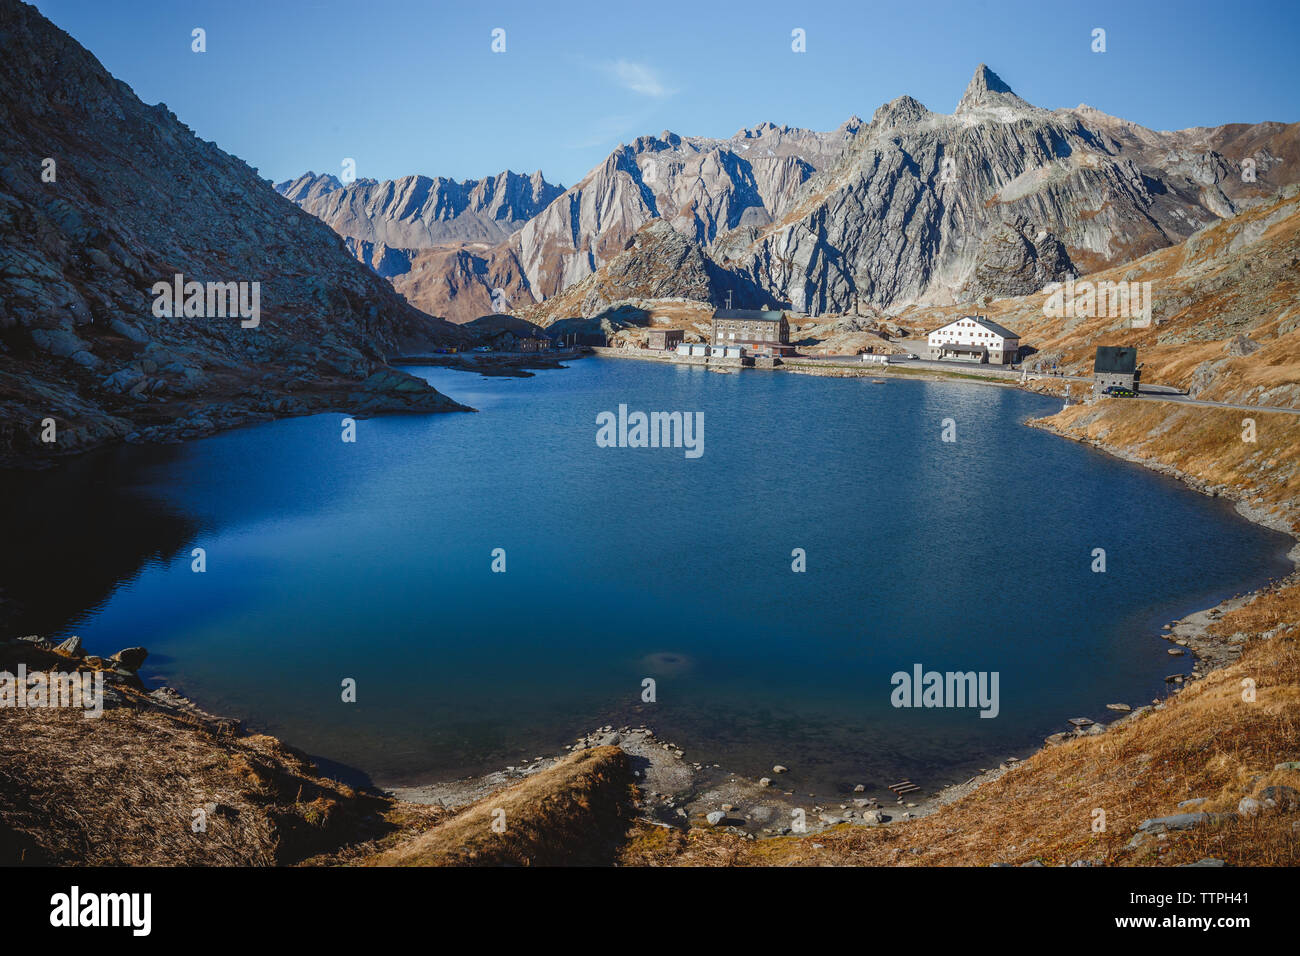 A mountain lake in the alps Stock Photo